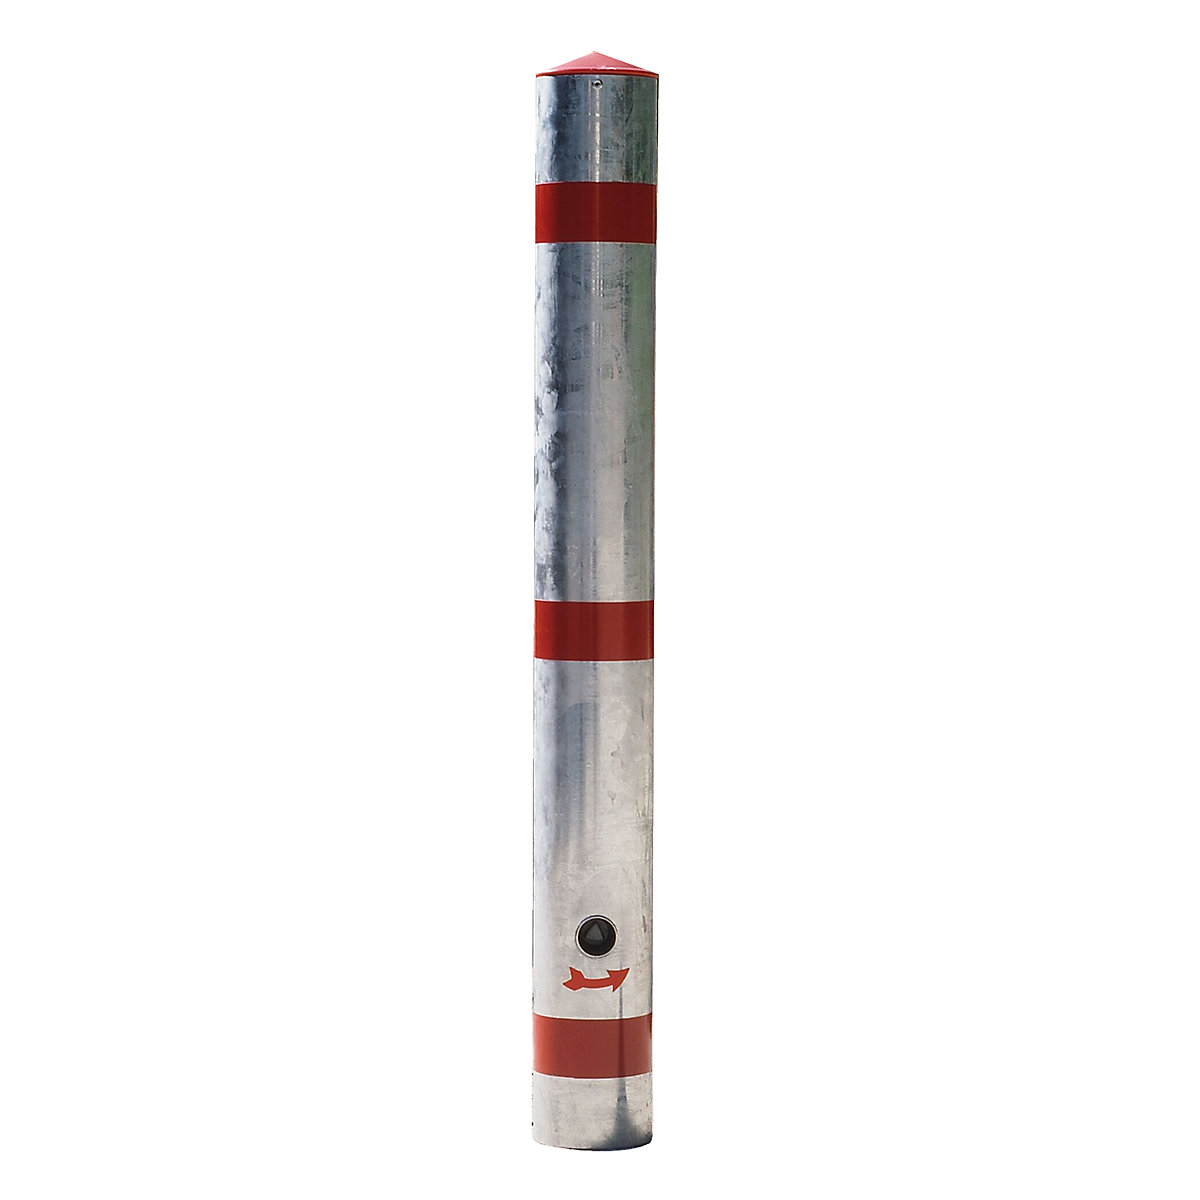 Barrier post made of tubular steel, removable, with base sleeve, round, Ø 76 mm